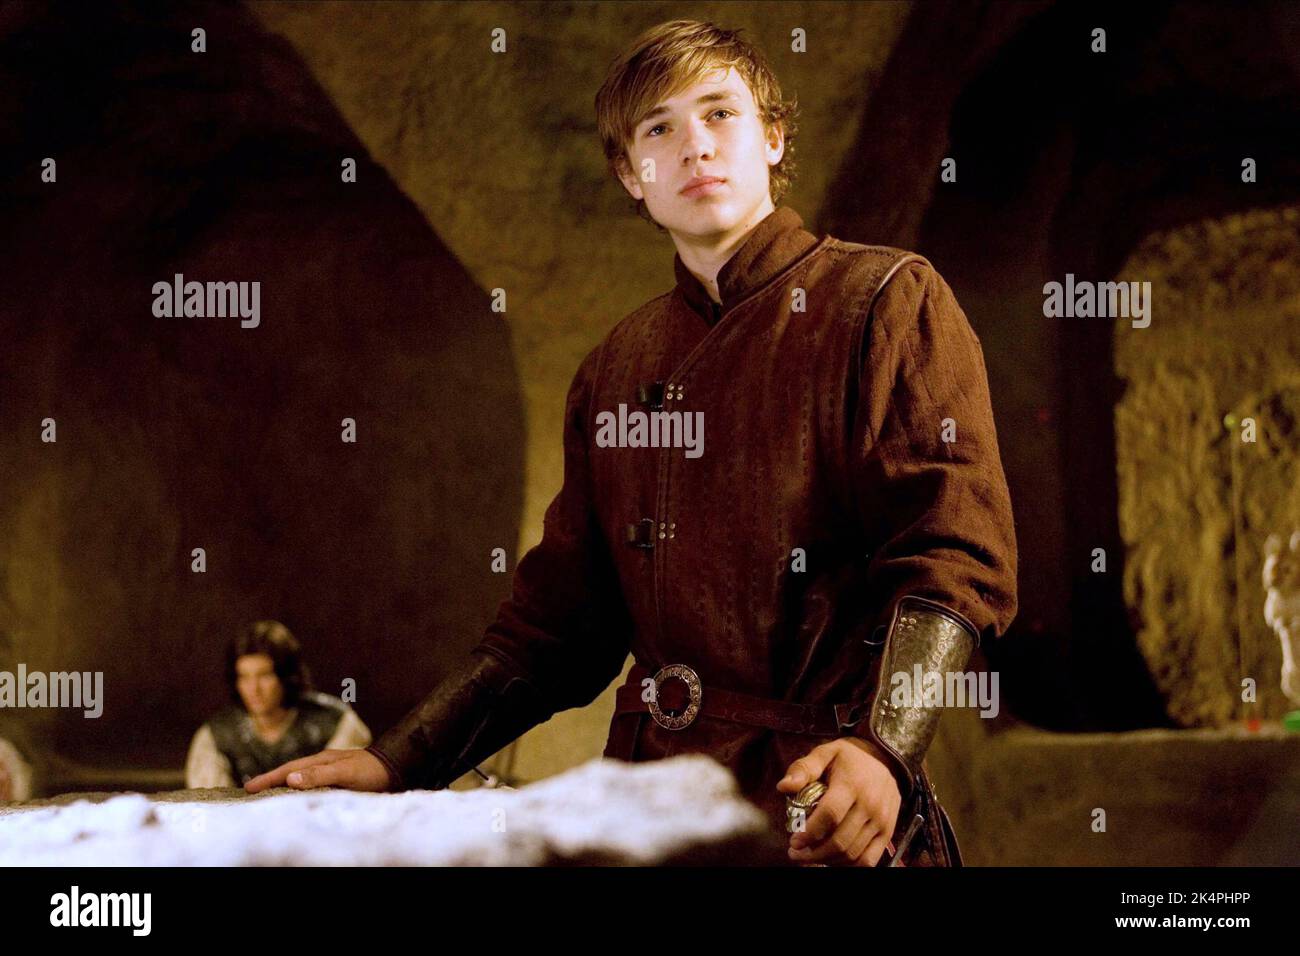 WILLIAM MOSELEY, THE CHRONICLES OF NARNIA: PRINCE CASPIAN, 2008 Stock Photo